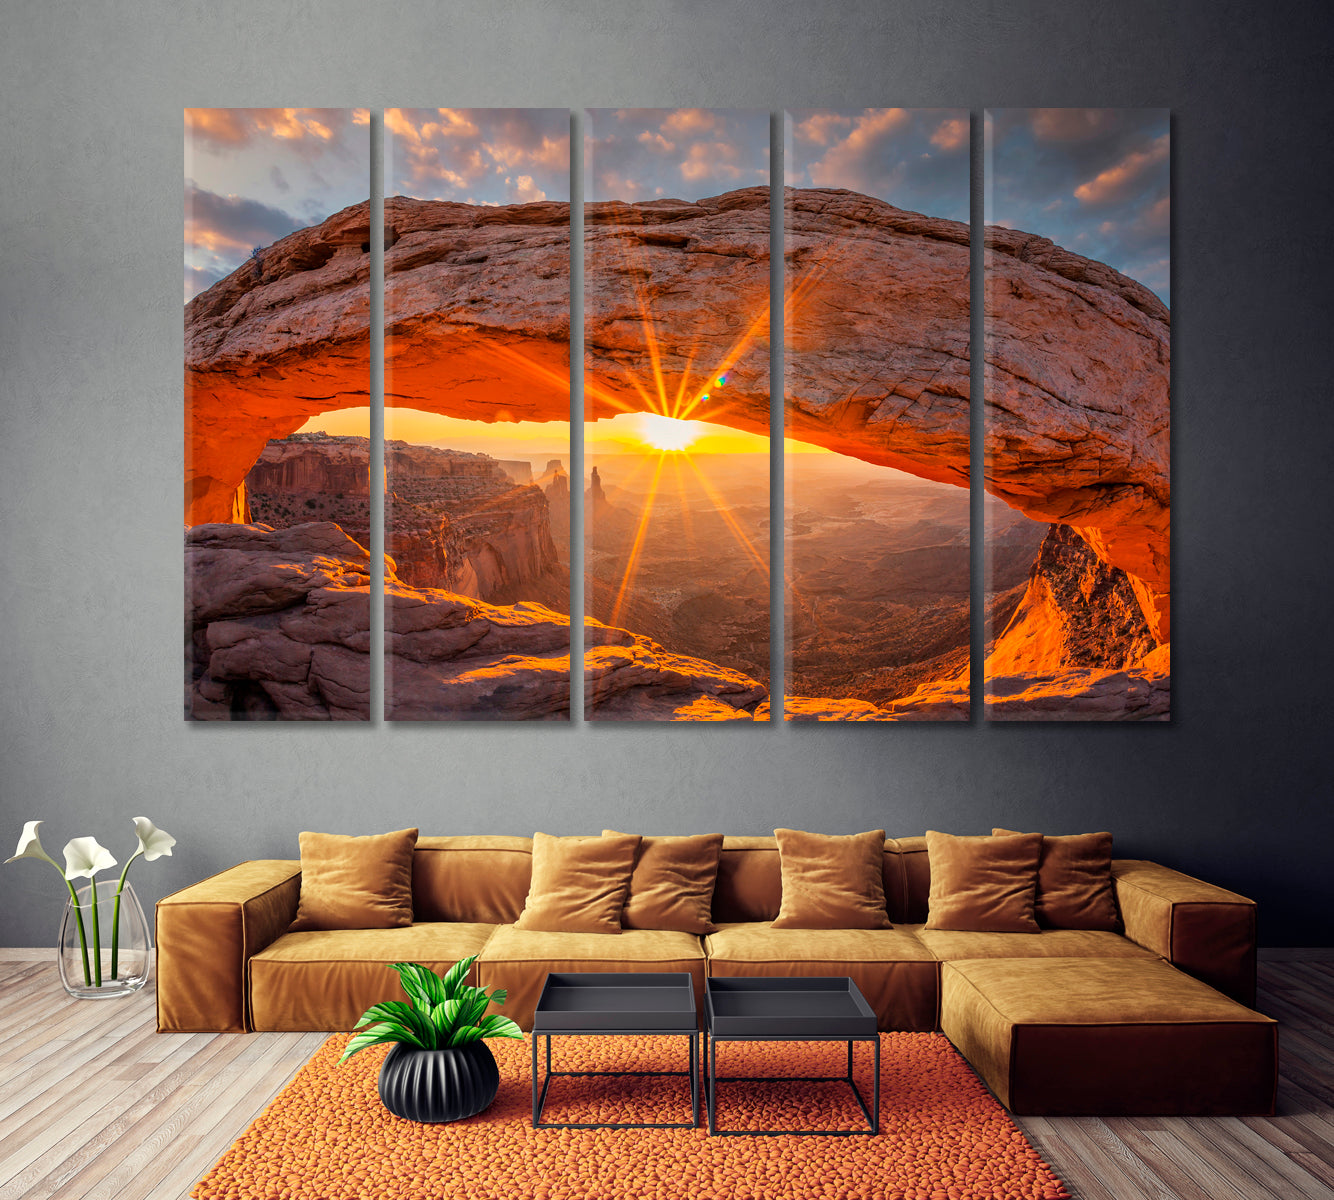 Mesa Arch at Sunrise in Canyonlands National Park Utah USA Canvas Print ArtLexy 5 Panels 36"x24" inches 